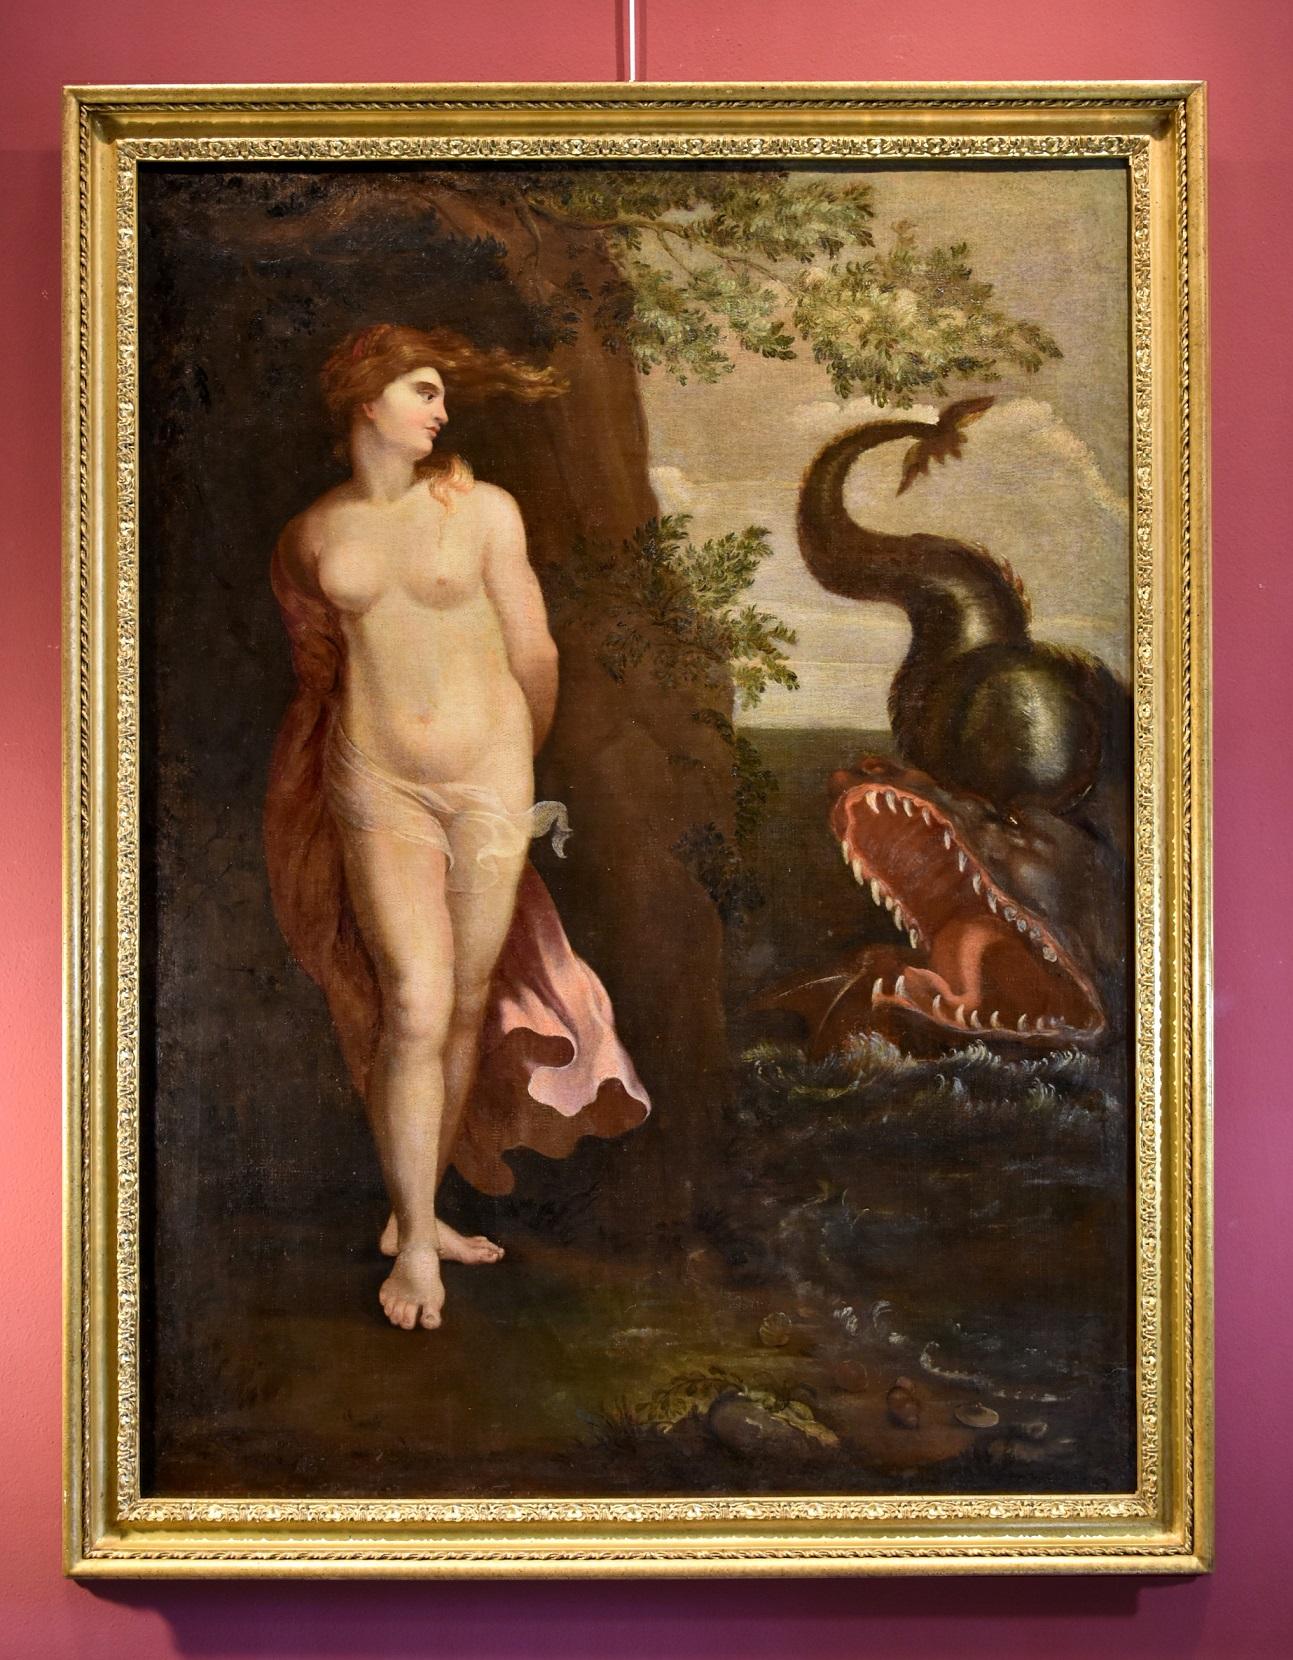 Andromeda Monster Paint Oil on canvas Old master 16/17th Century Roman school - Painting by Painter active in Rome